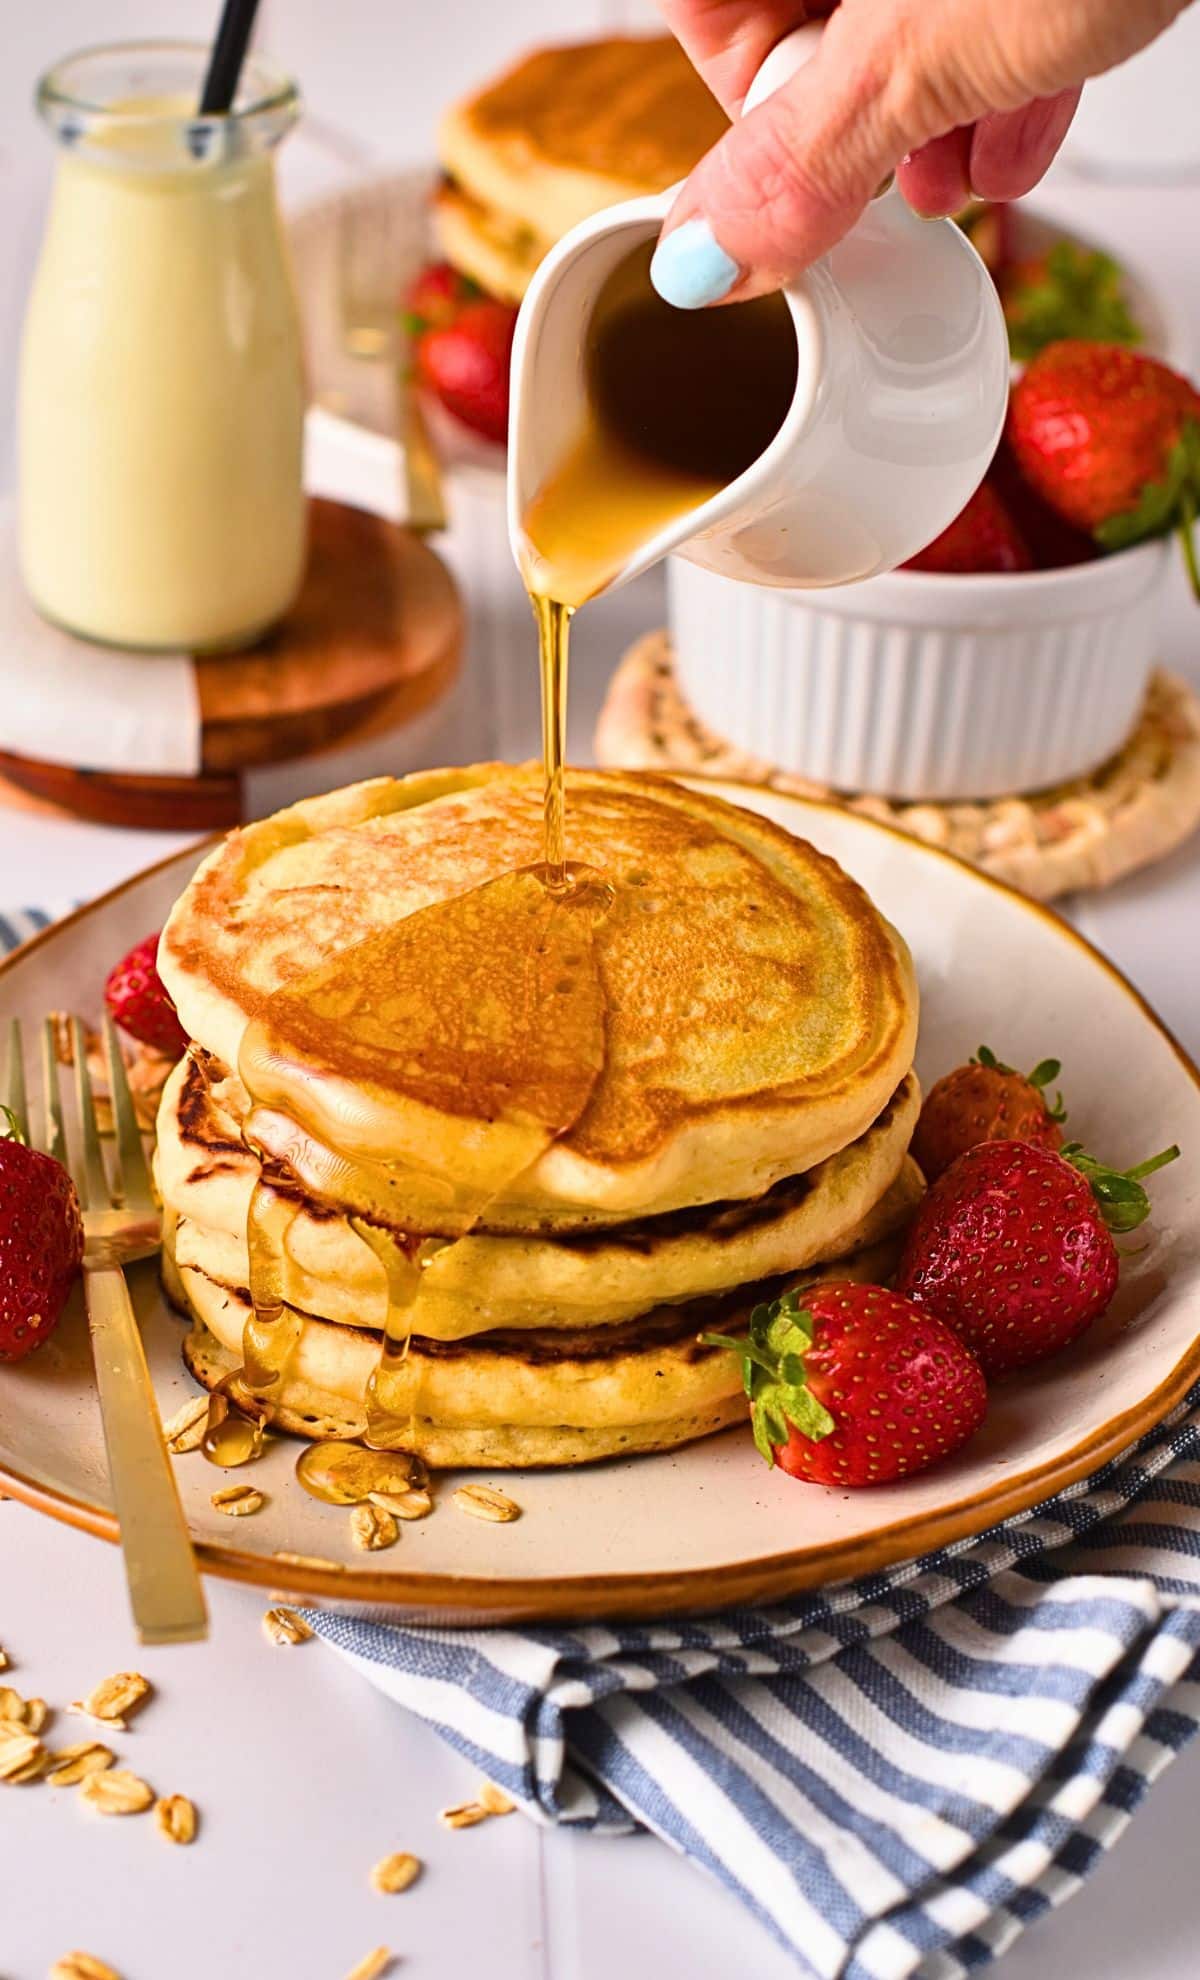 Pouring maple syrup on a stack of vegan pancakes decorated with strawberries on a plate with a golden fork.